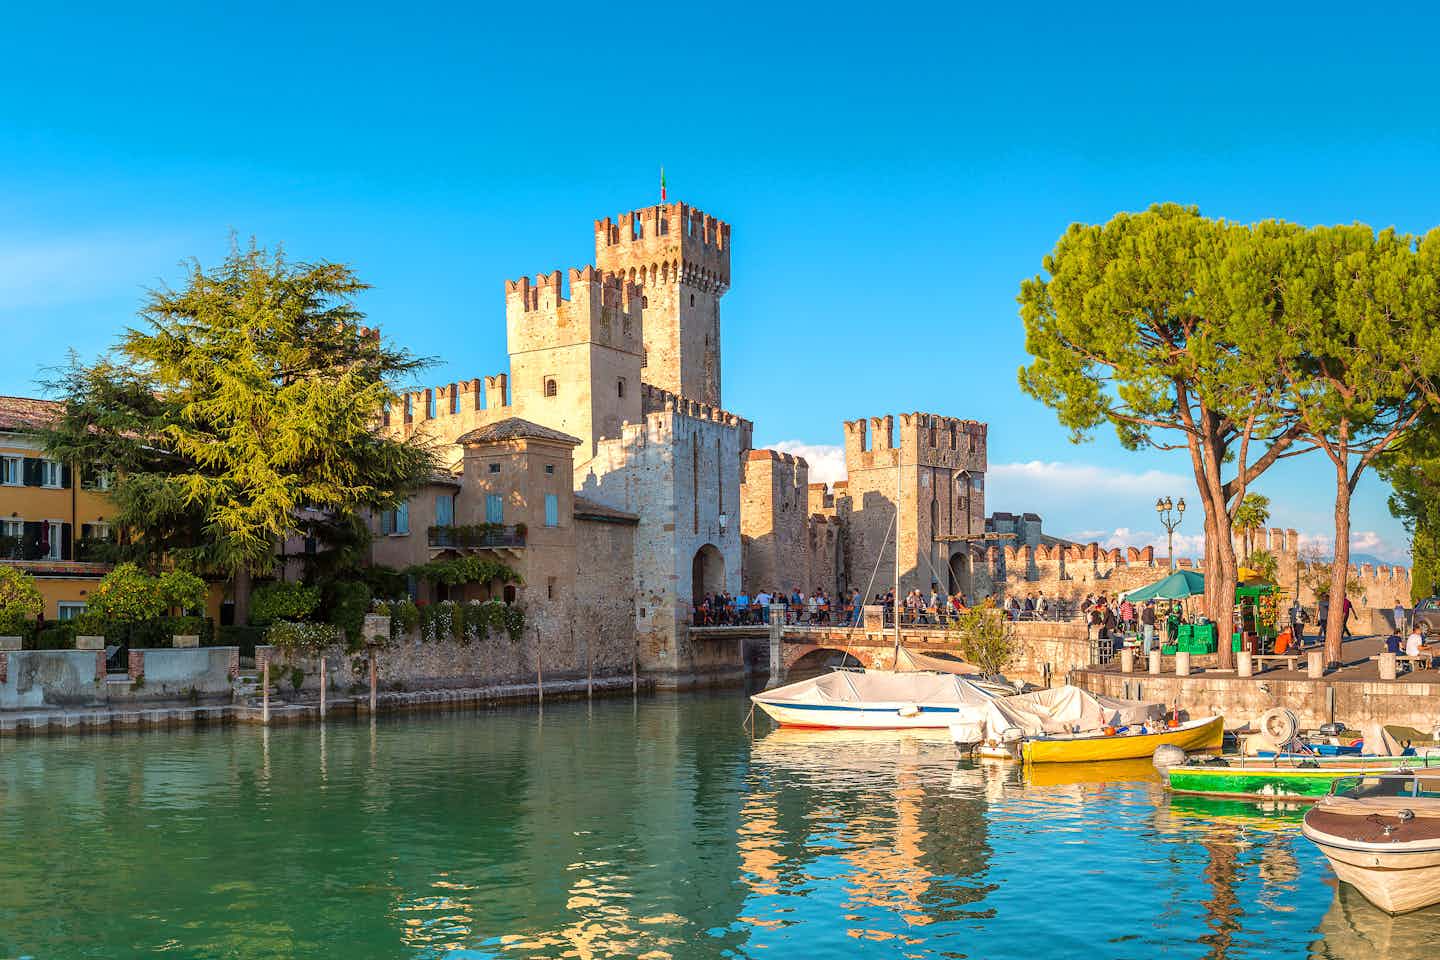 Camping in Sirmione